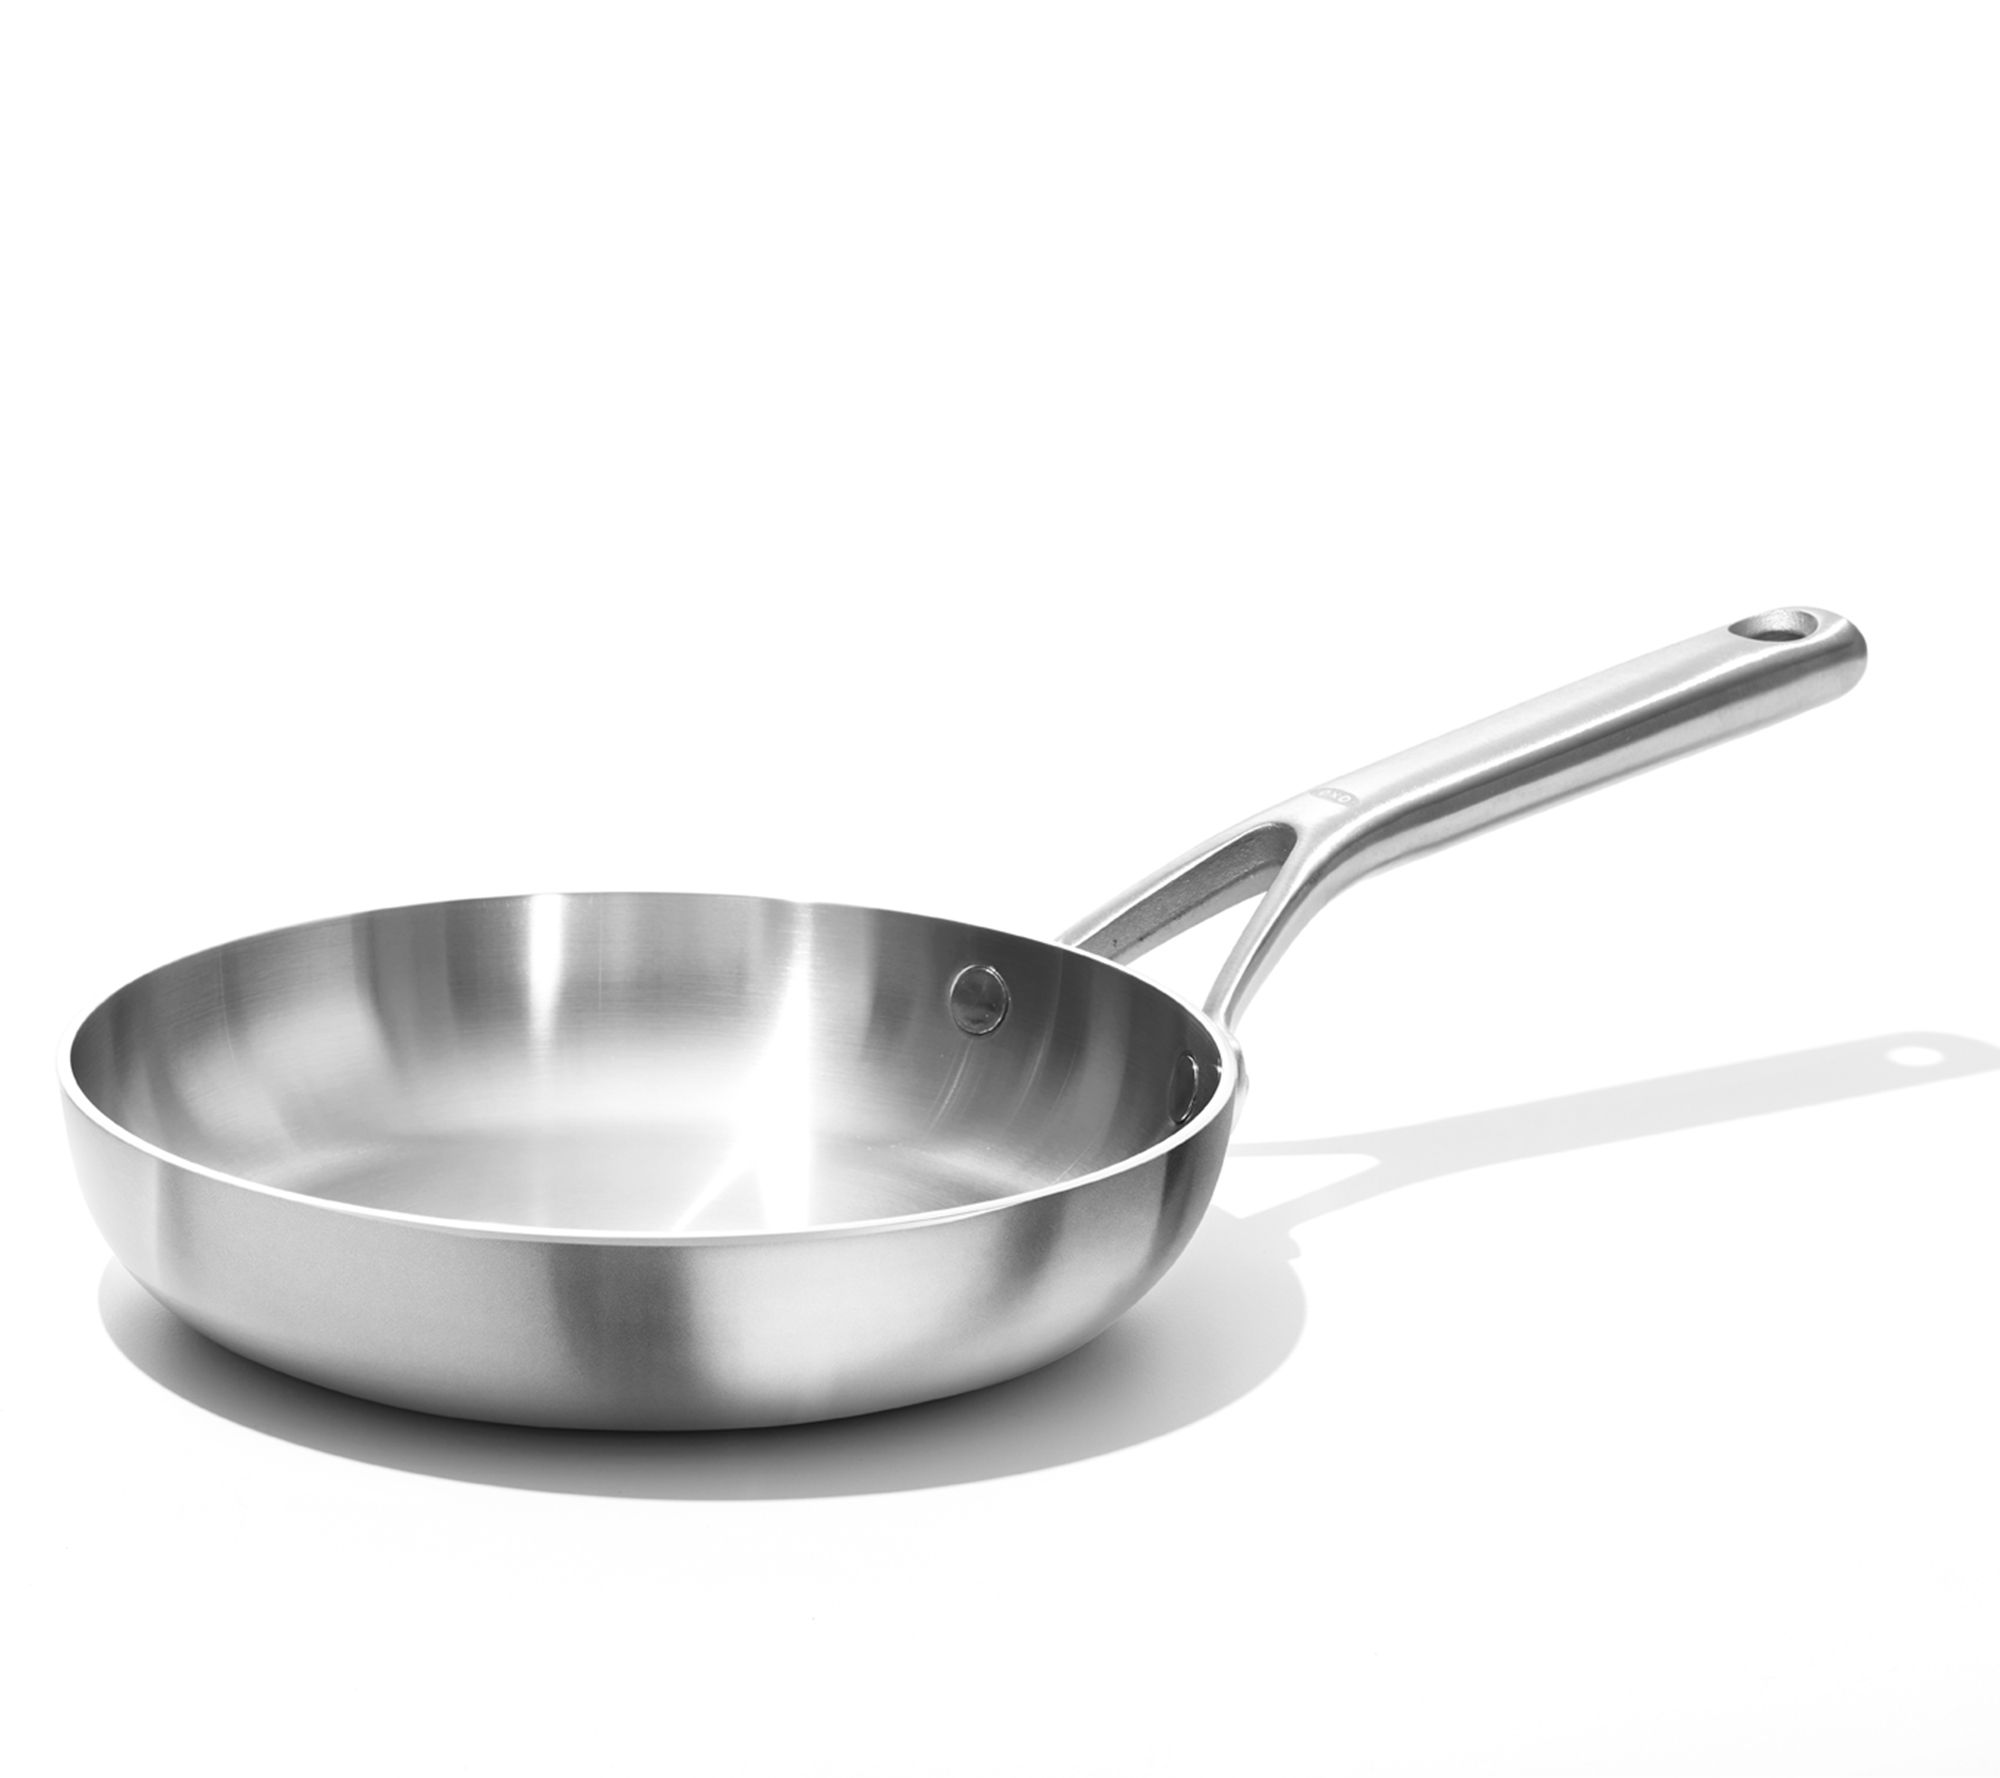 All-Clad Tri-Ply Stainless Steel 8 and 12 Fry Pan Set on QVC 